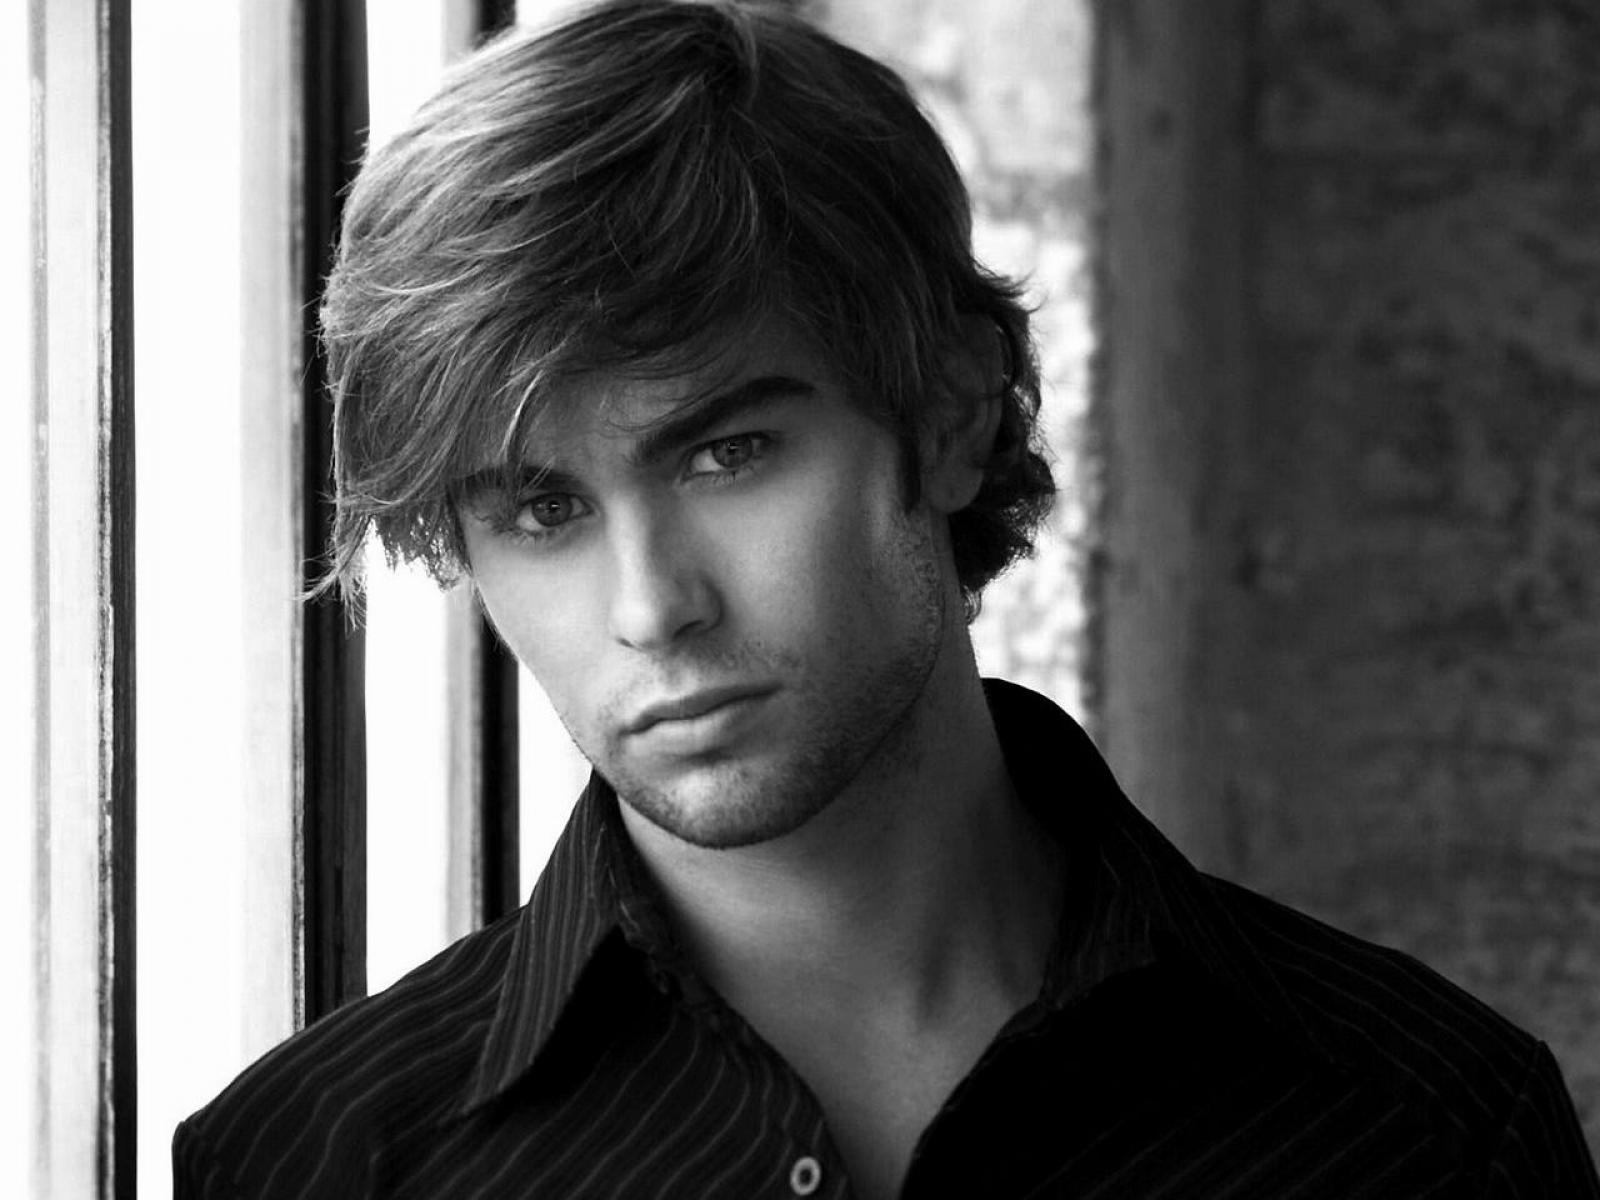 Chace Crawford Wallpaper, High Definition, High